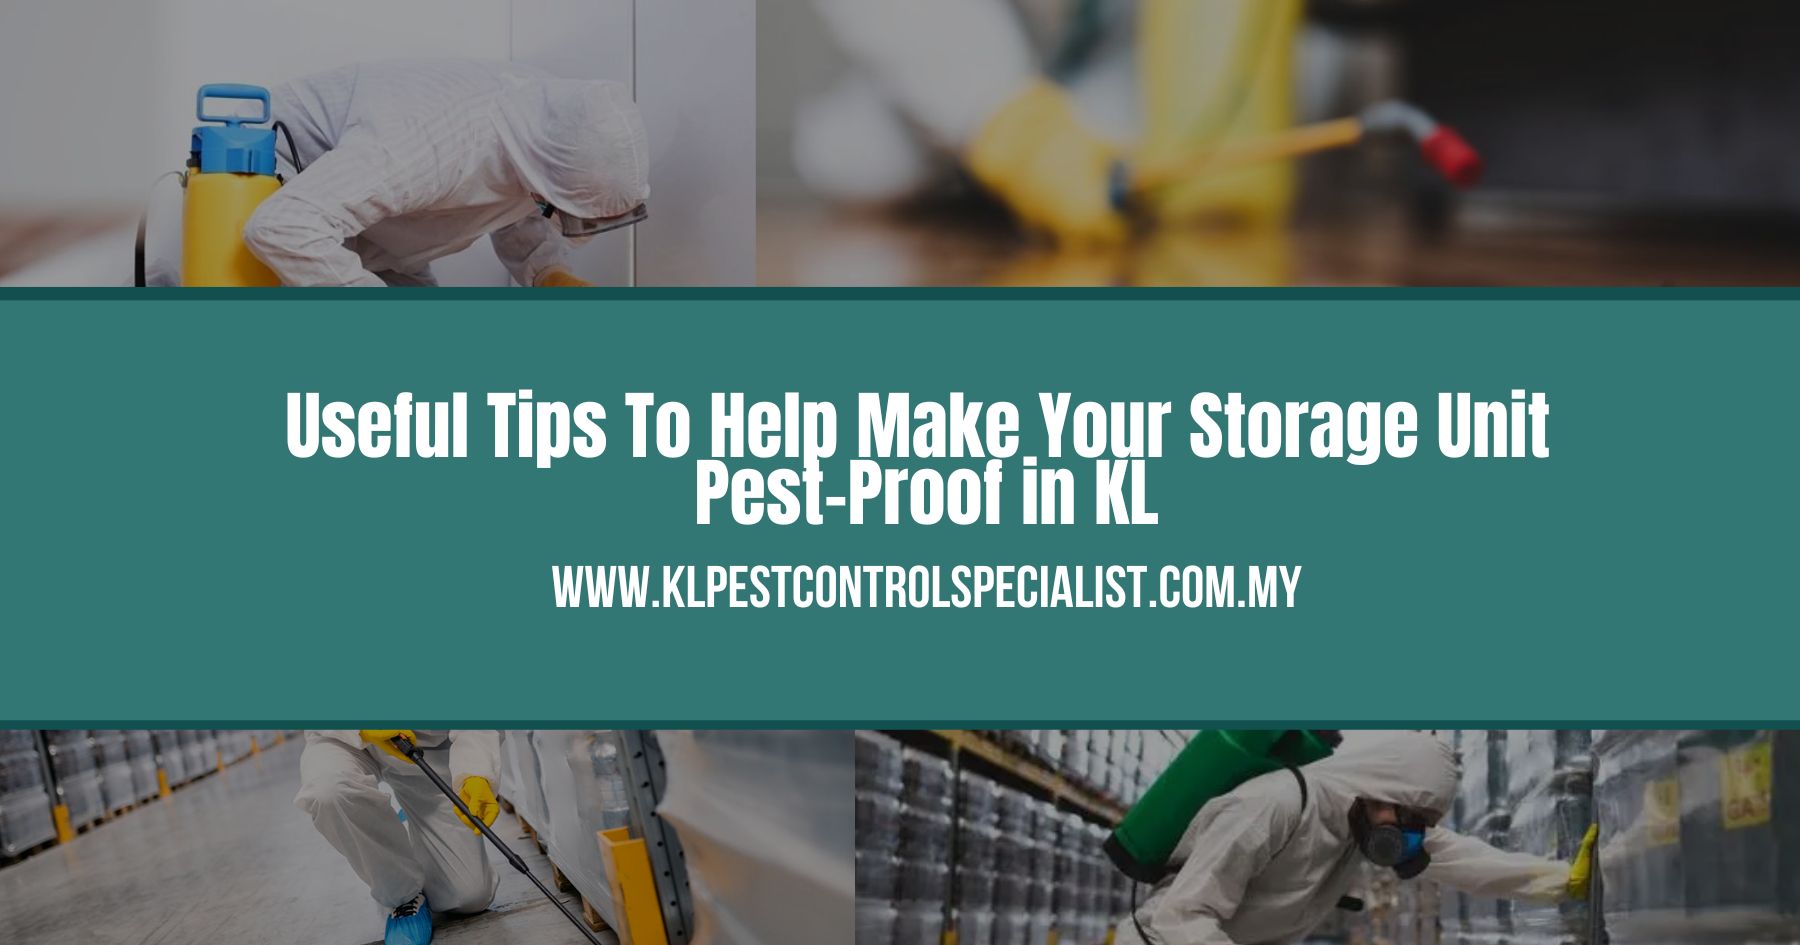 Useful Tips To Help Make Your Storage Unit Pest-Proof in KL